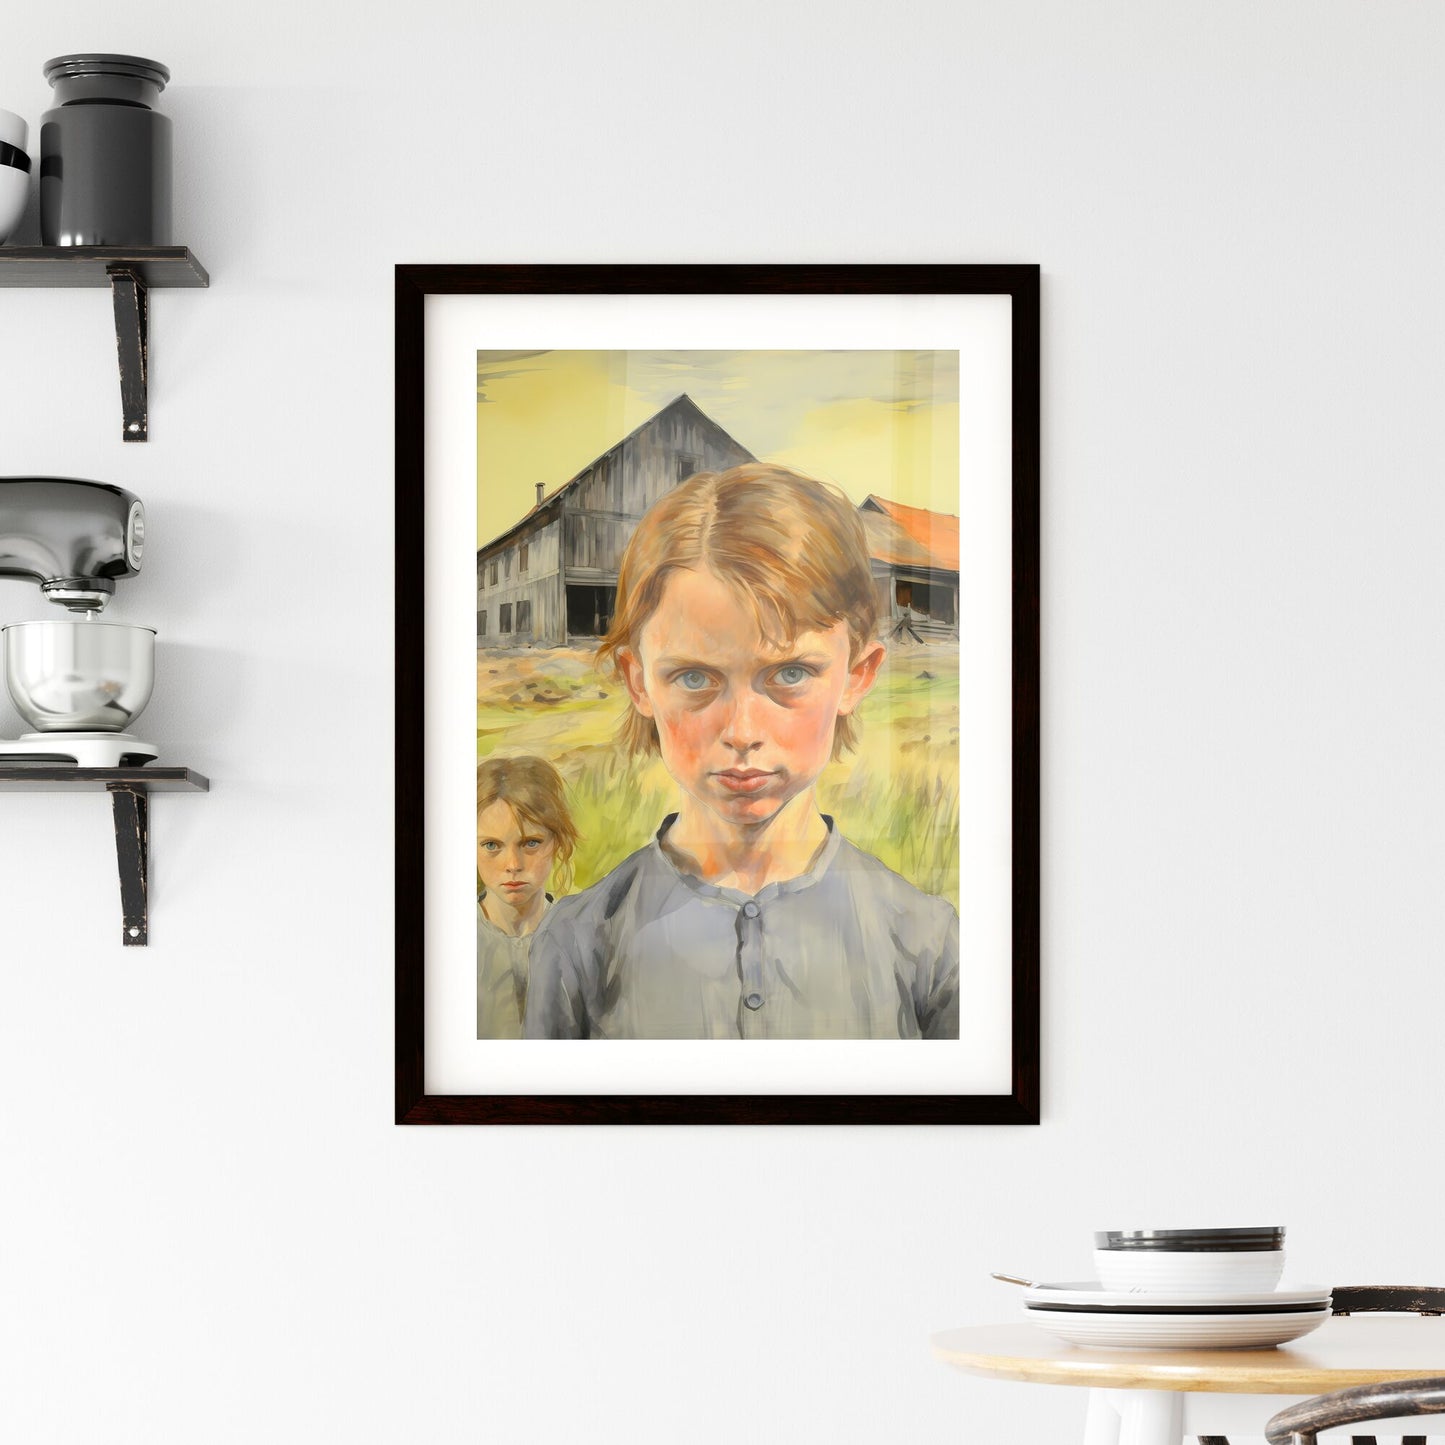 A Poster of In a country side - A Girl Looking At The Camera Default Title